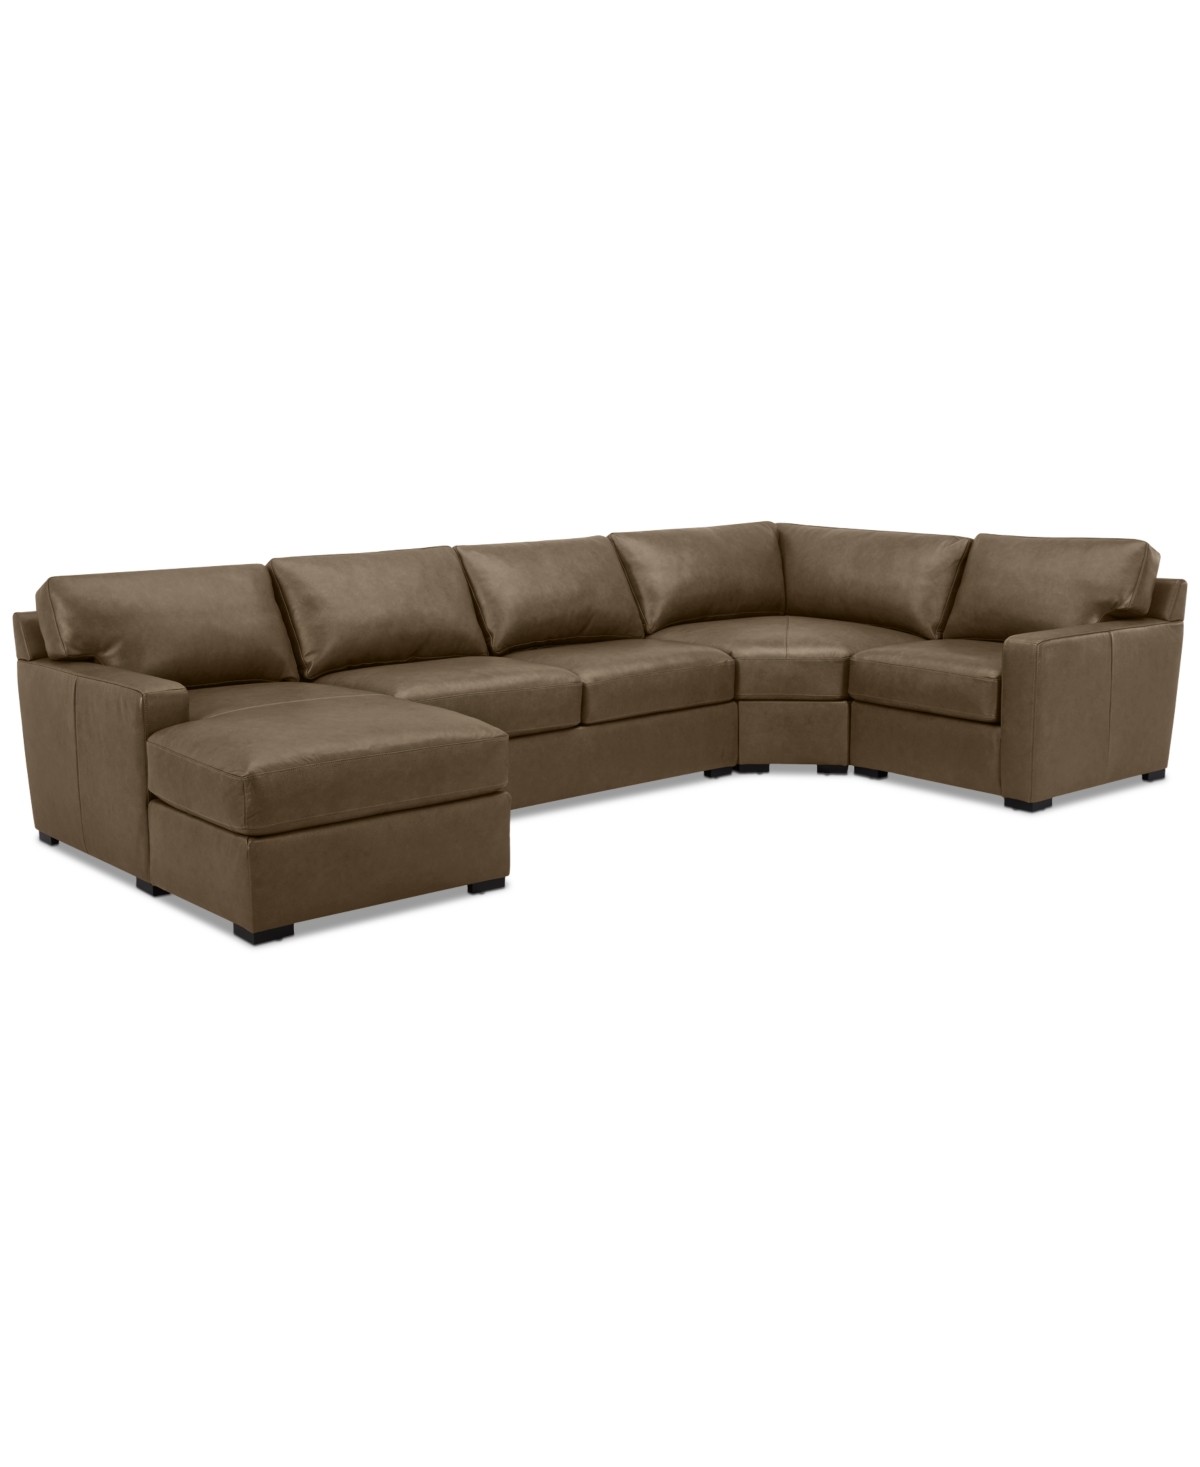 Macy's Radley 148" 4-pc. Leather Wedge Modular Chaise Sectional, Created For  In Sand